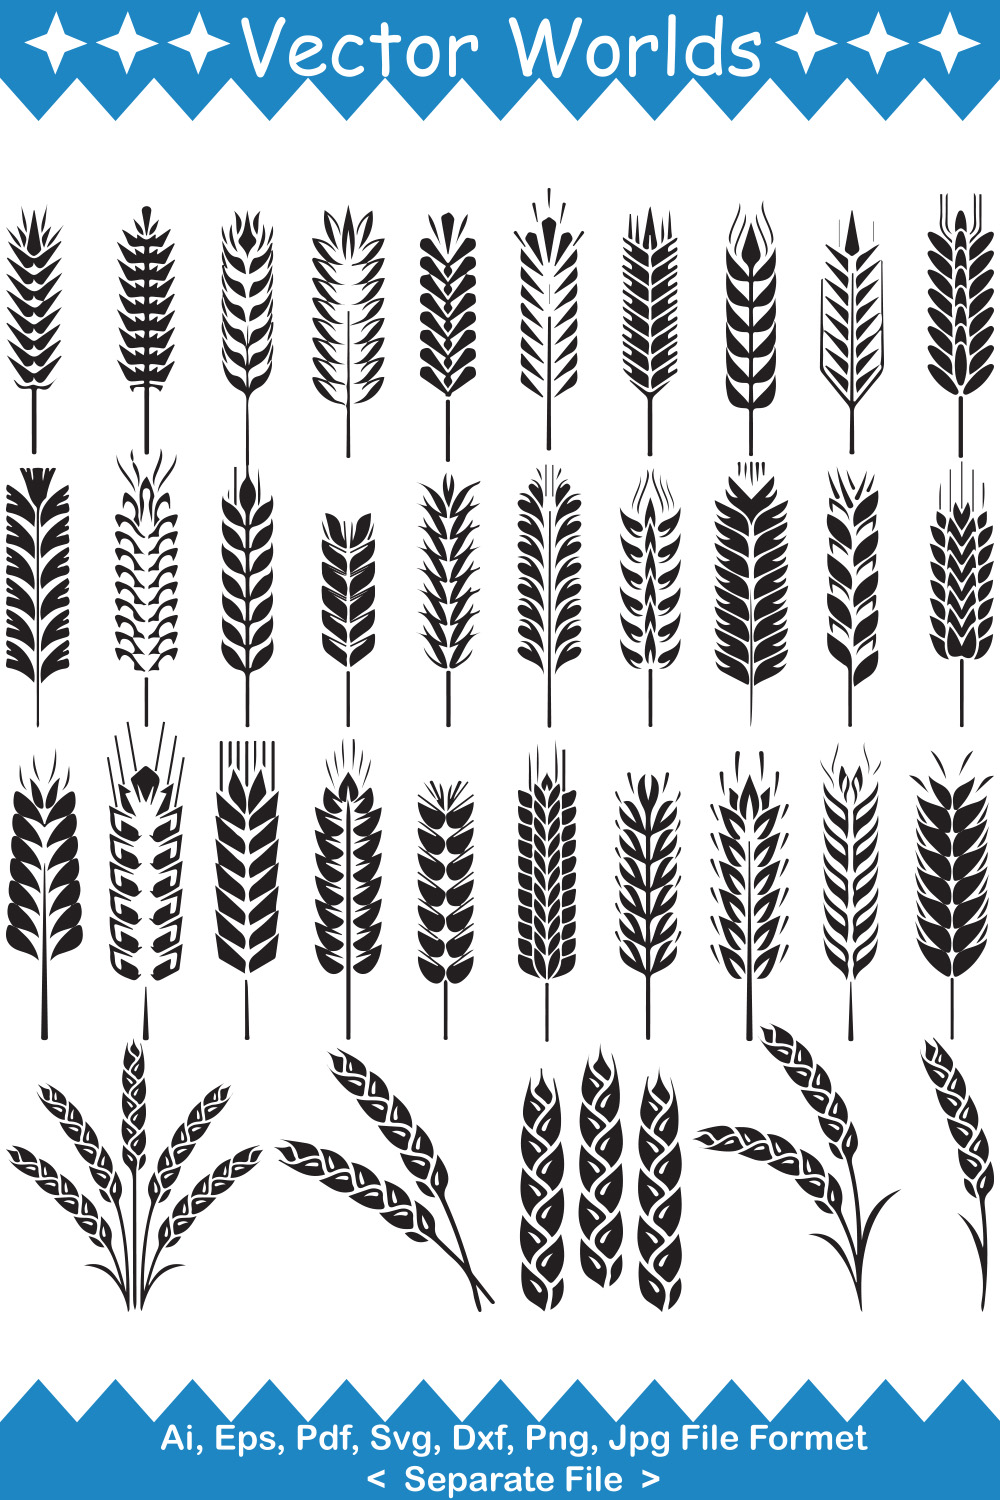 Bundle of gorgeous images of silhouettes of corn stalk.